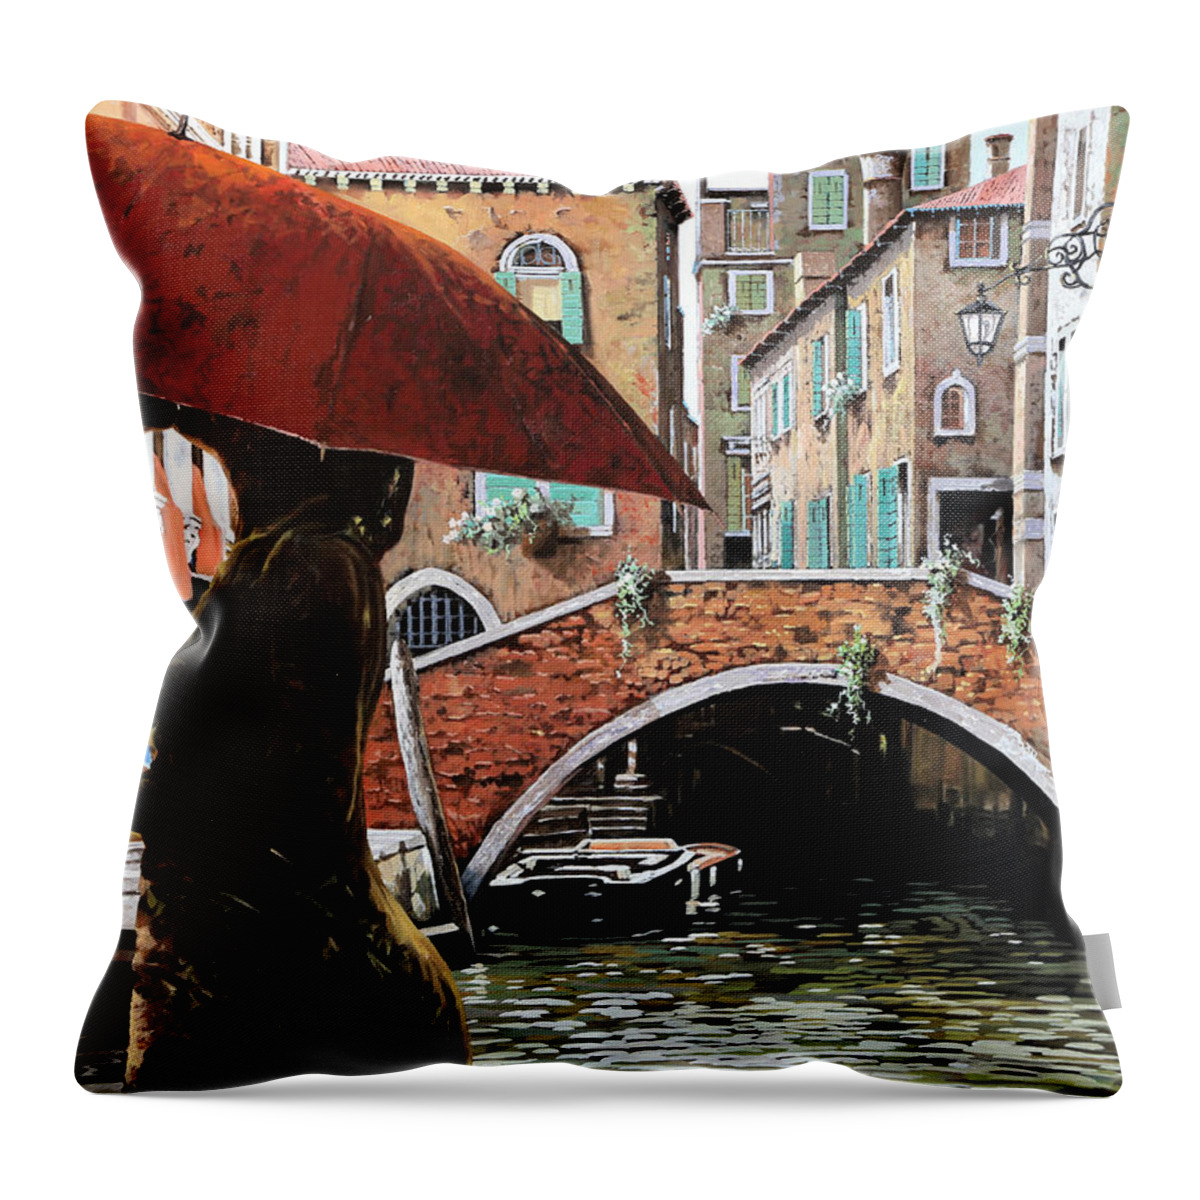 Canal Scene Throw Pillow featuring the painting Baci Sotto L'ombrello by Guido Borelli